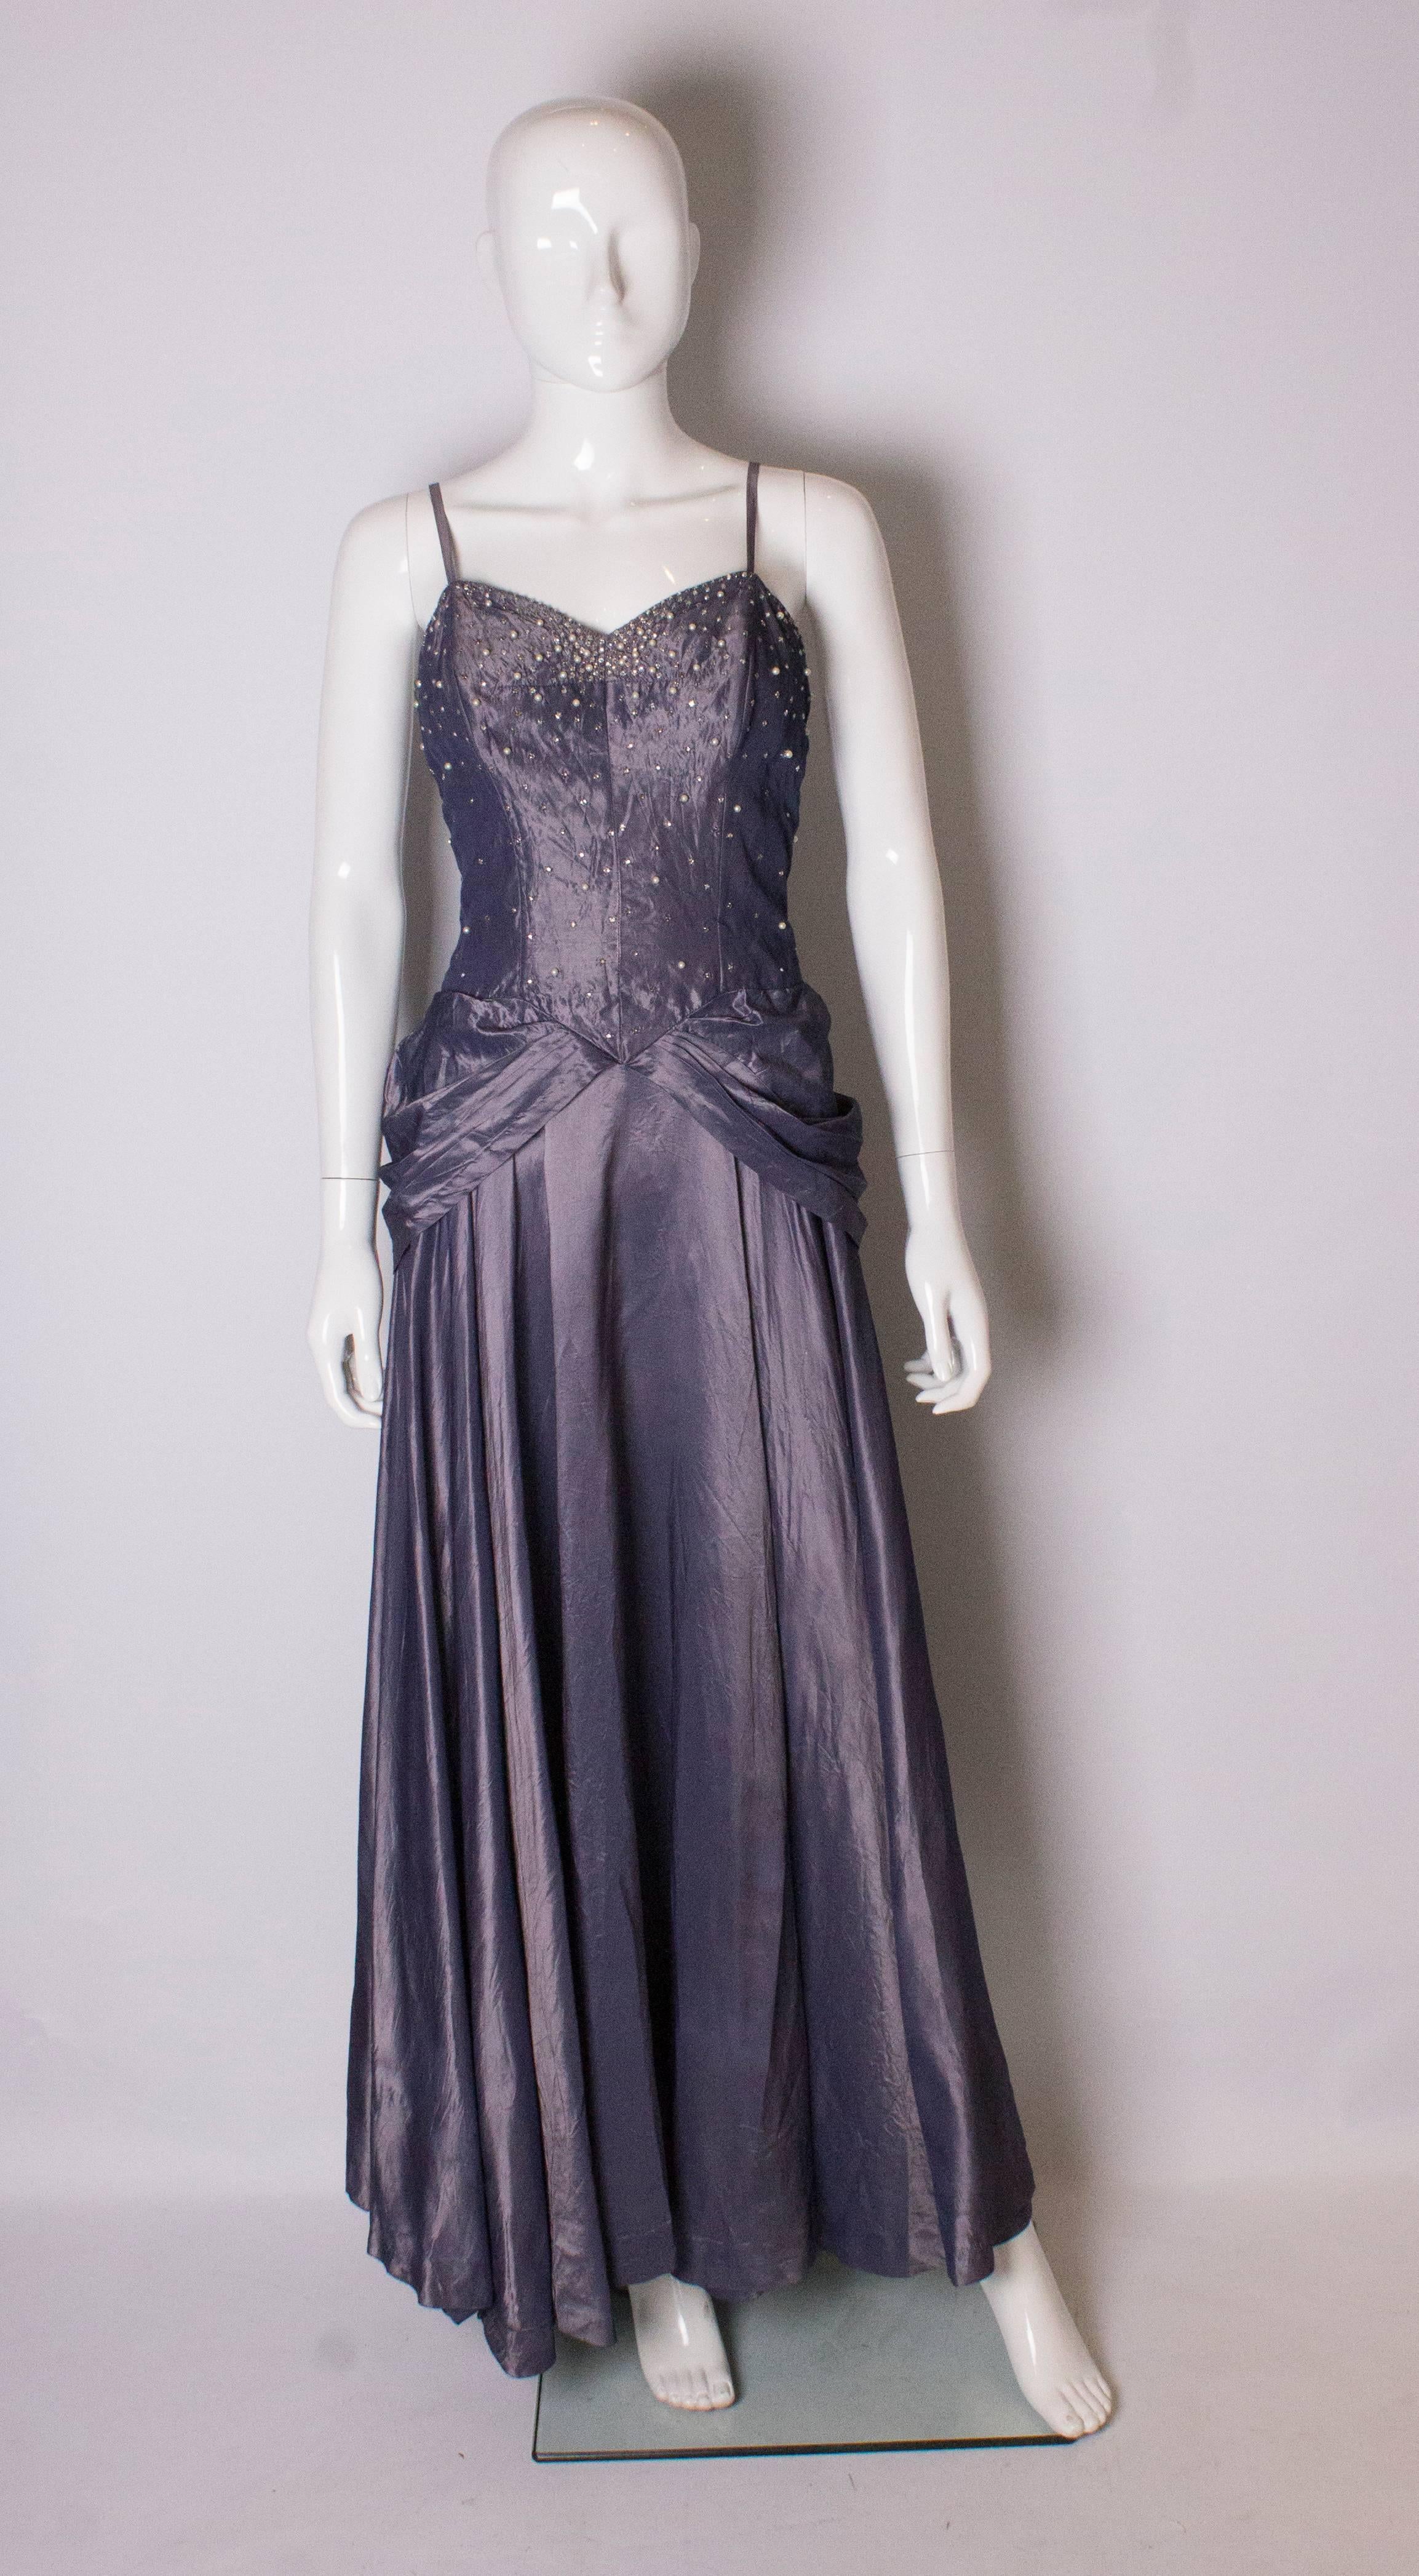 A pretty  1940s gown by Robert Goldberg. The gown is in a dusty lilac colour with spagetti straps and pearl and diamante detail on the bust area. It has a central back zip and full skirt, with sash detail at the waist.